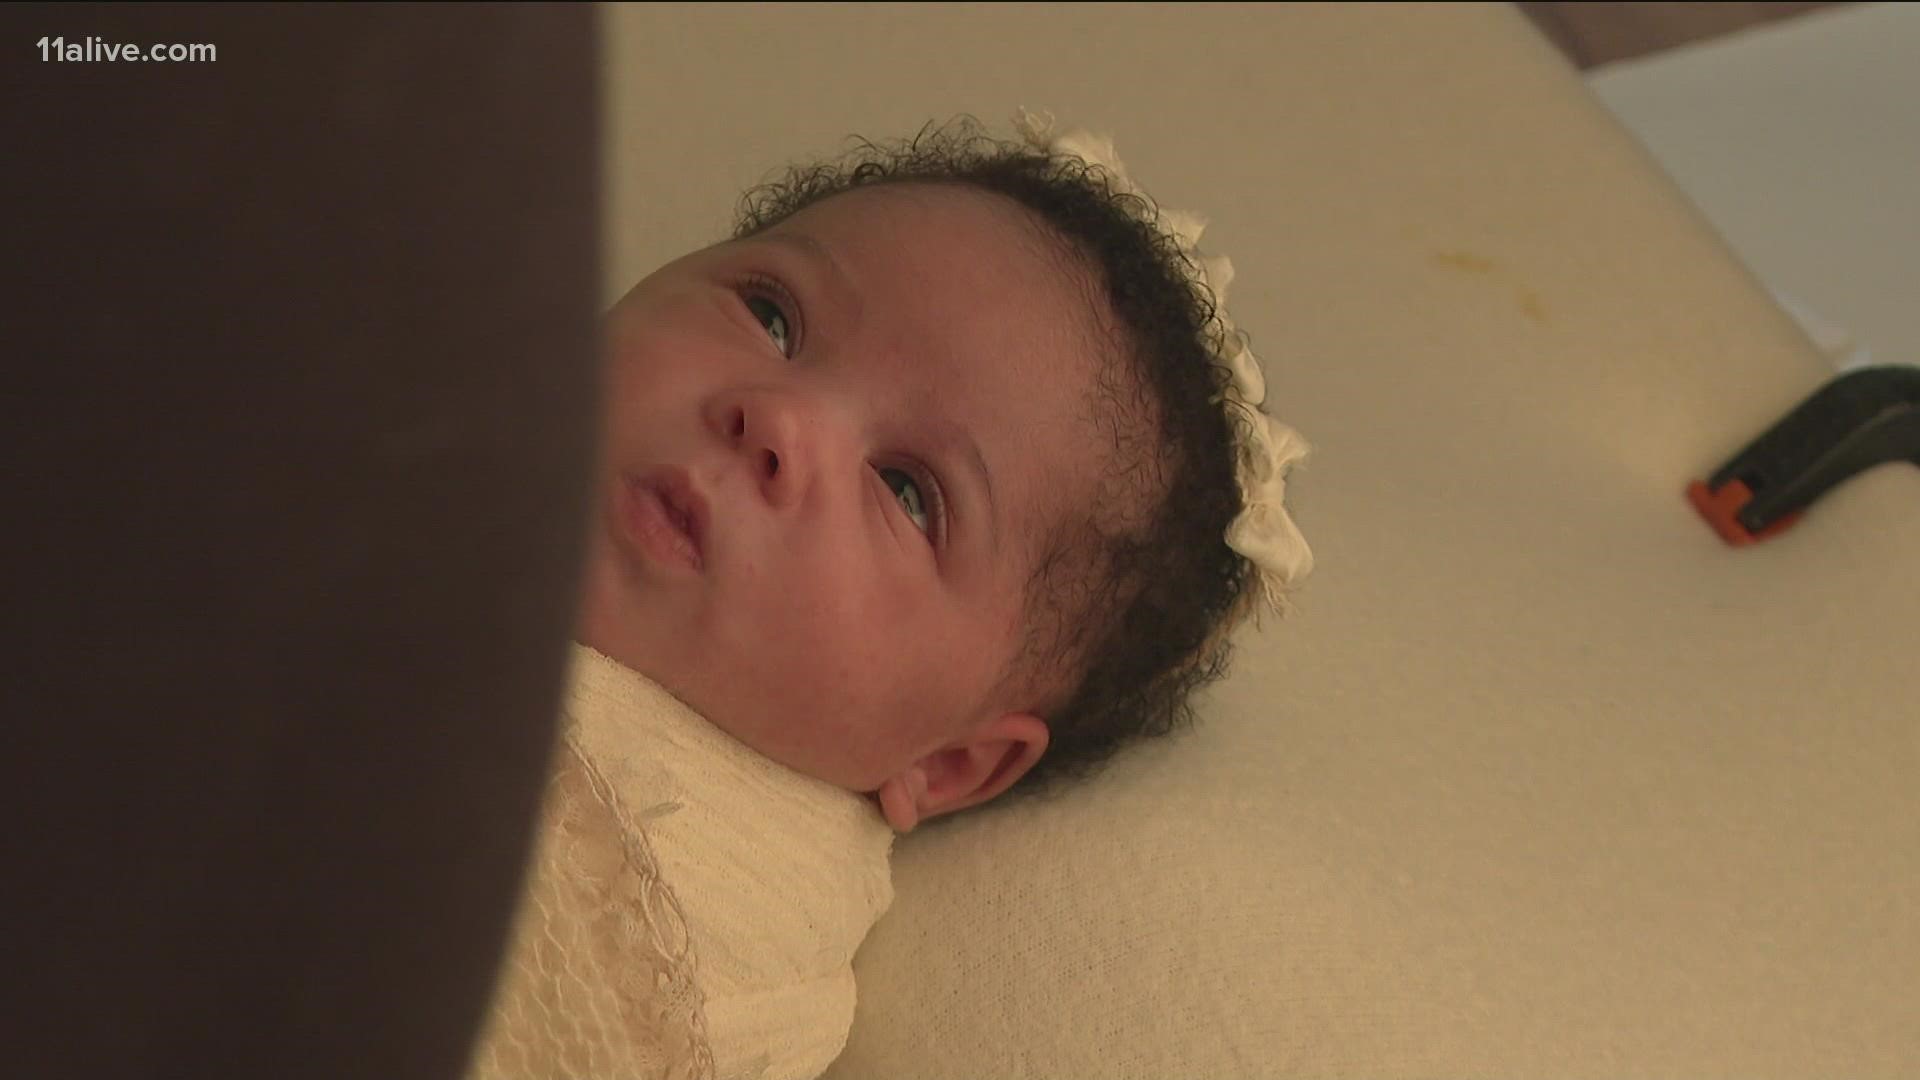 A Cartersville family says they're especially grateful to have this little one home with them during the holidays.